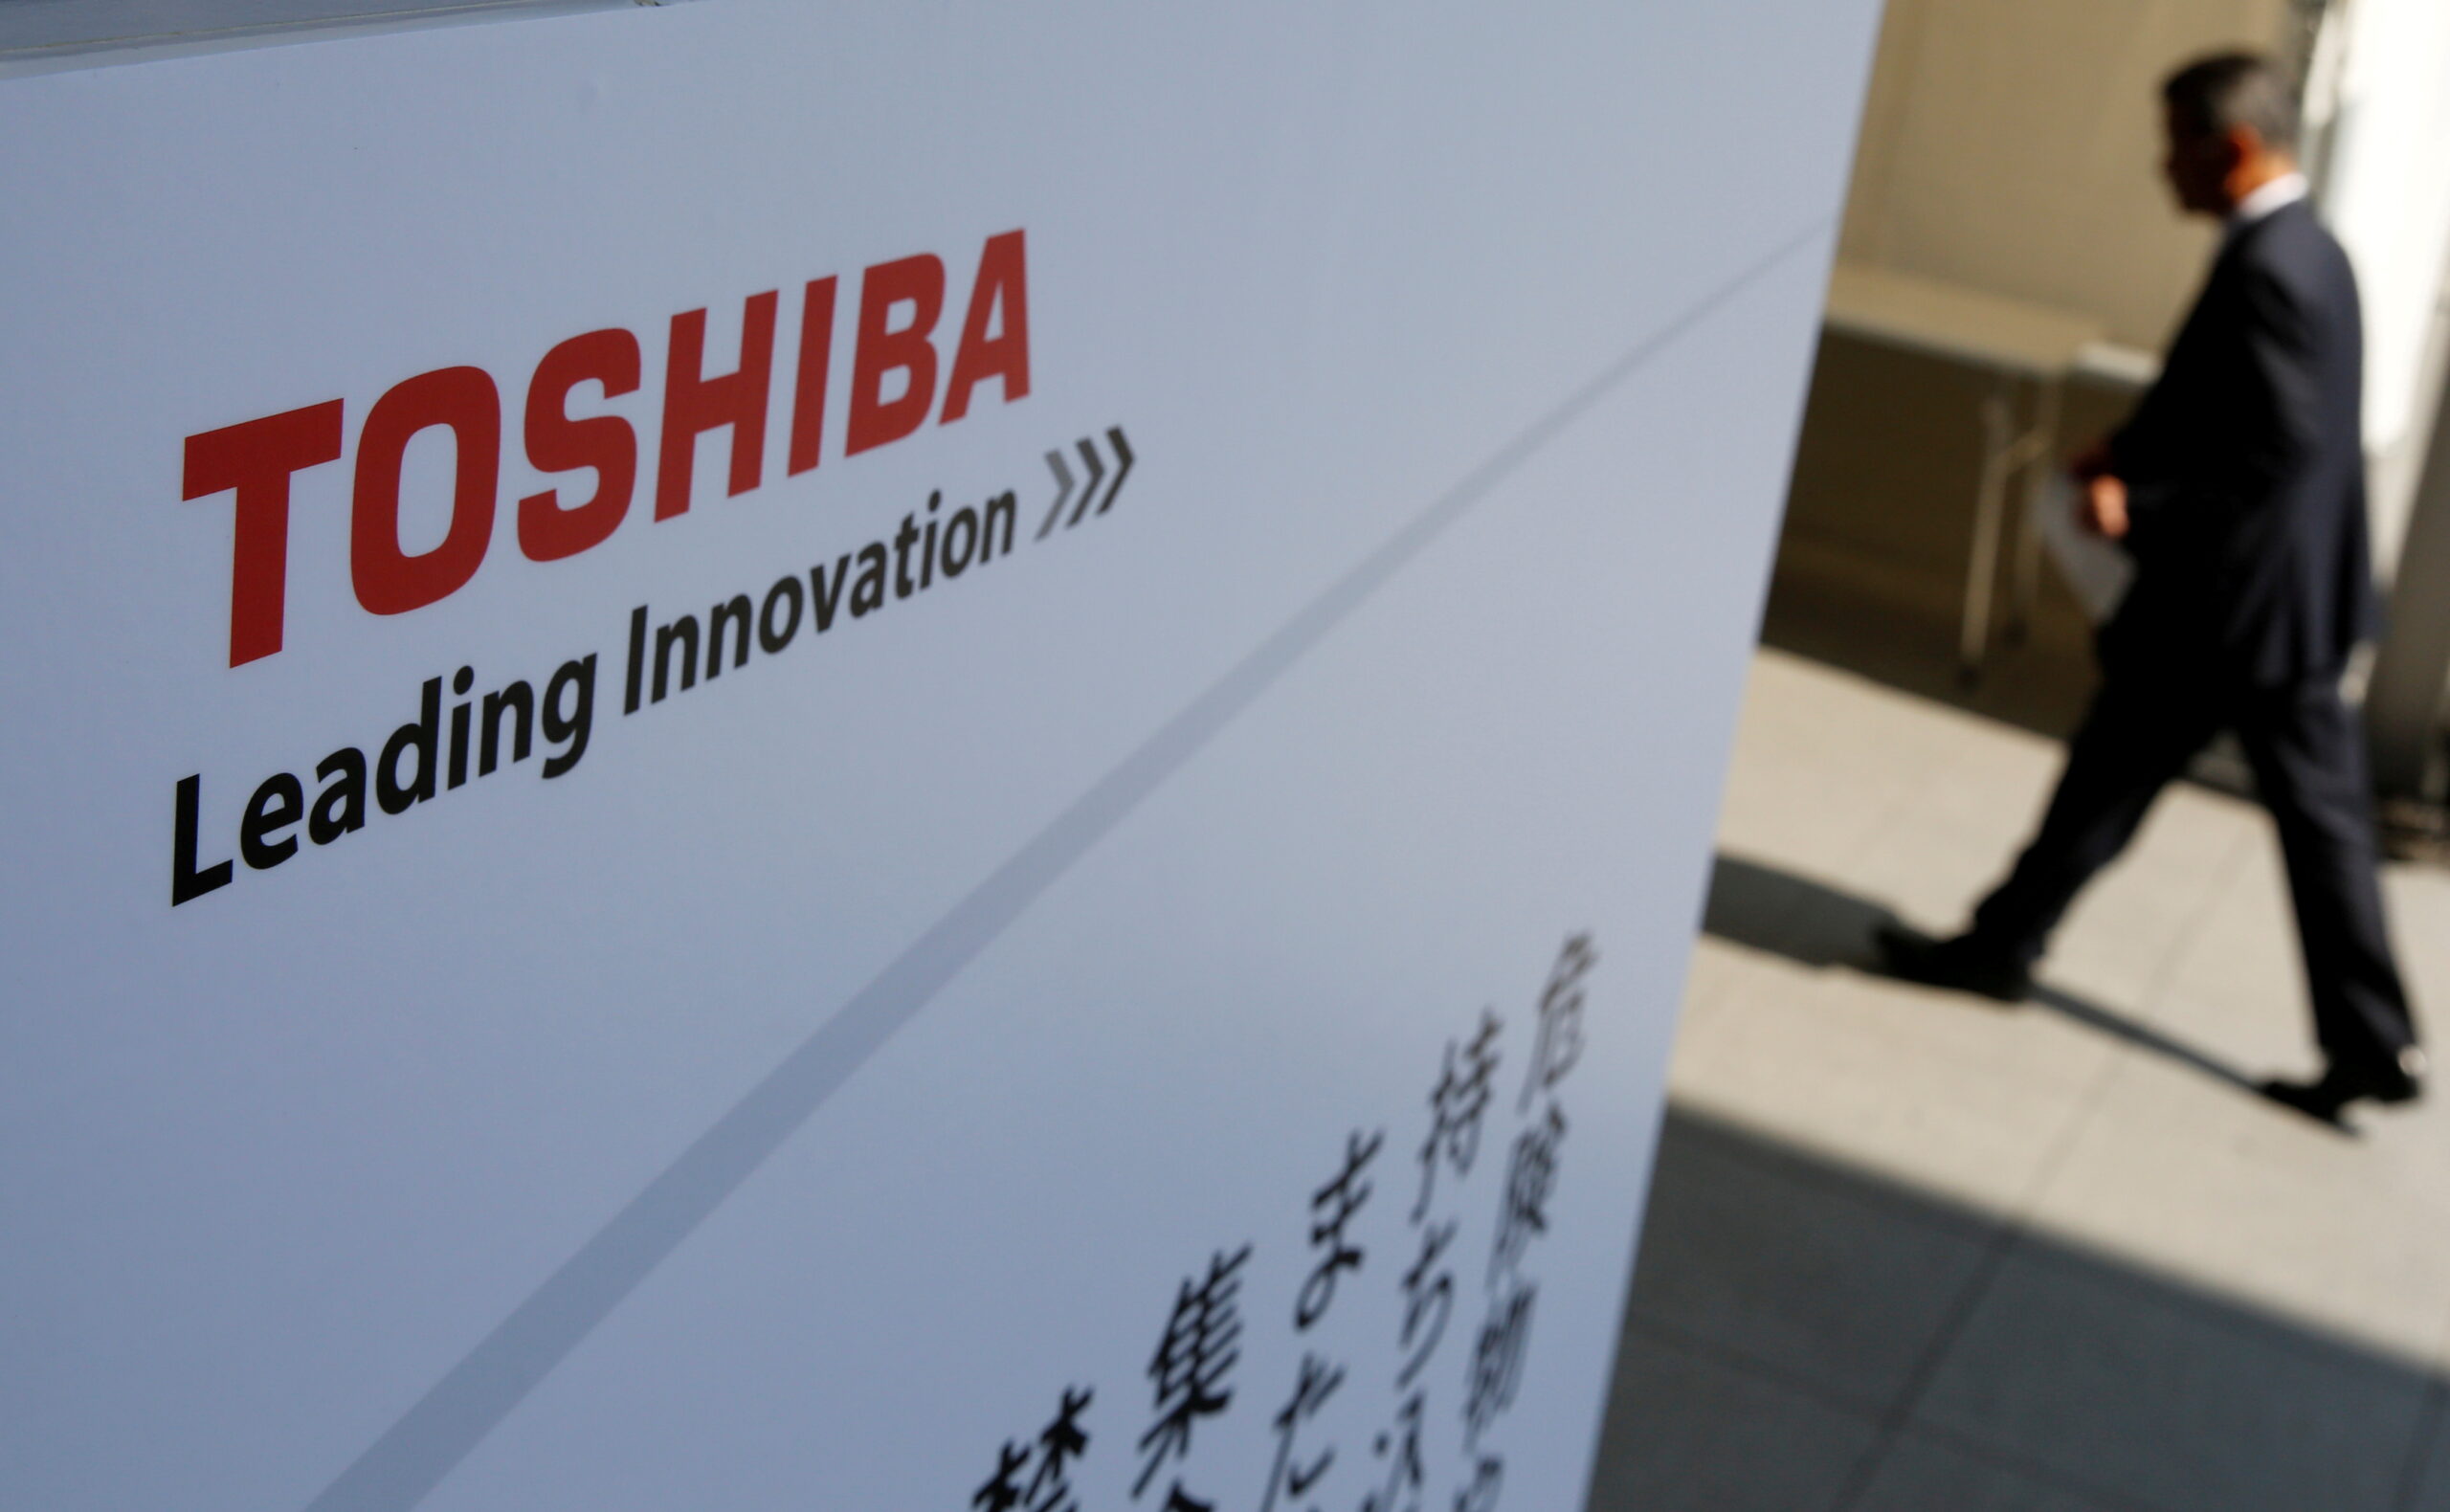 Toshiba CEO suddenly resigns amid opposition to restructuring plans